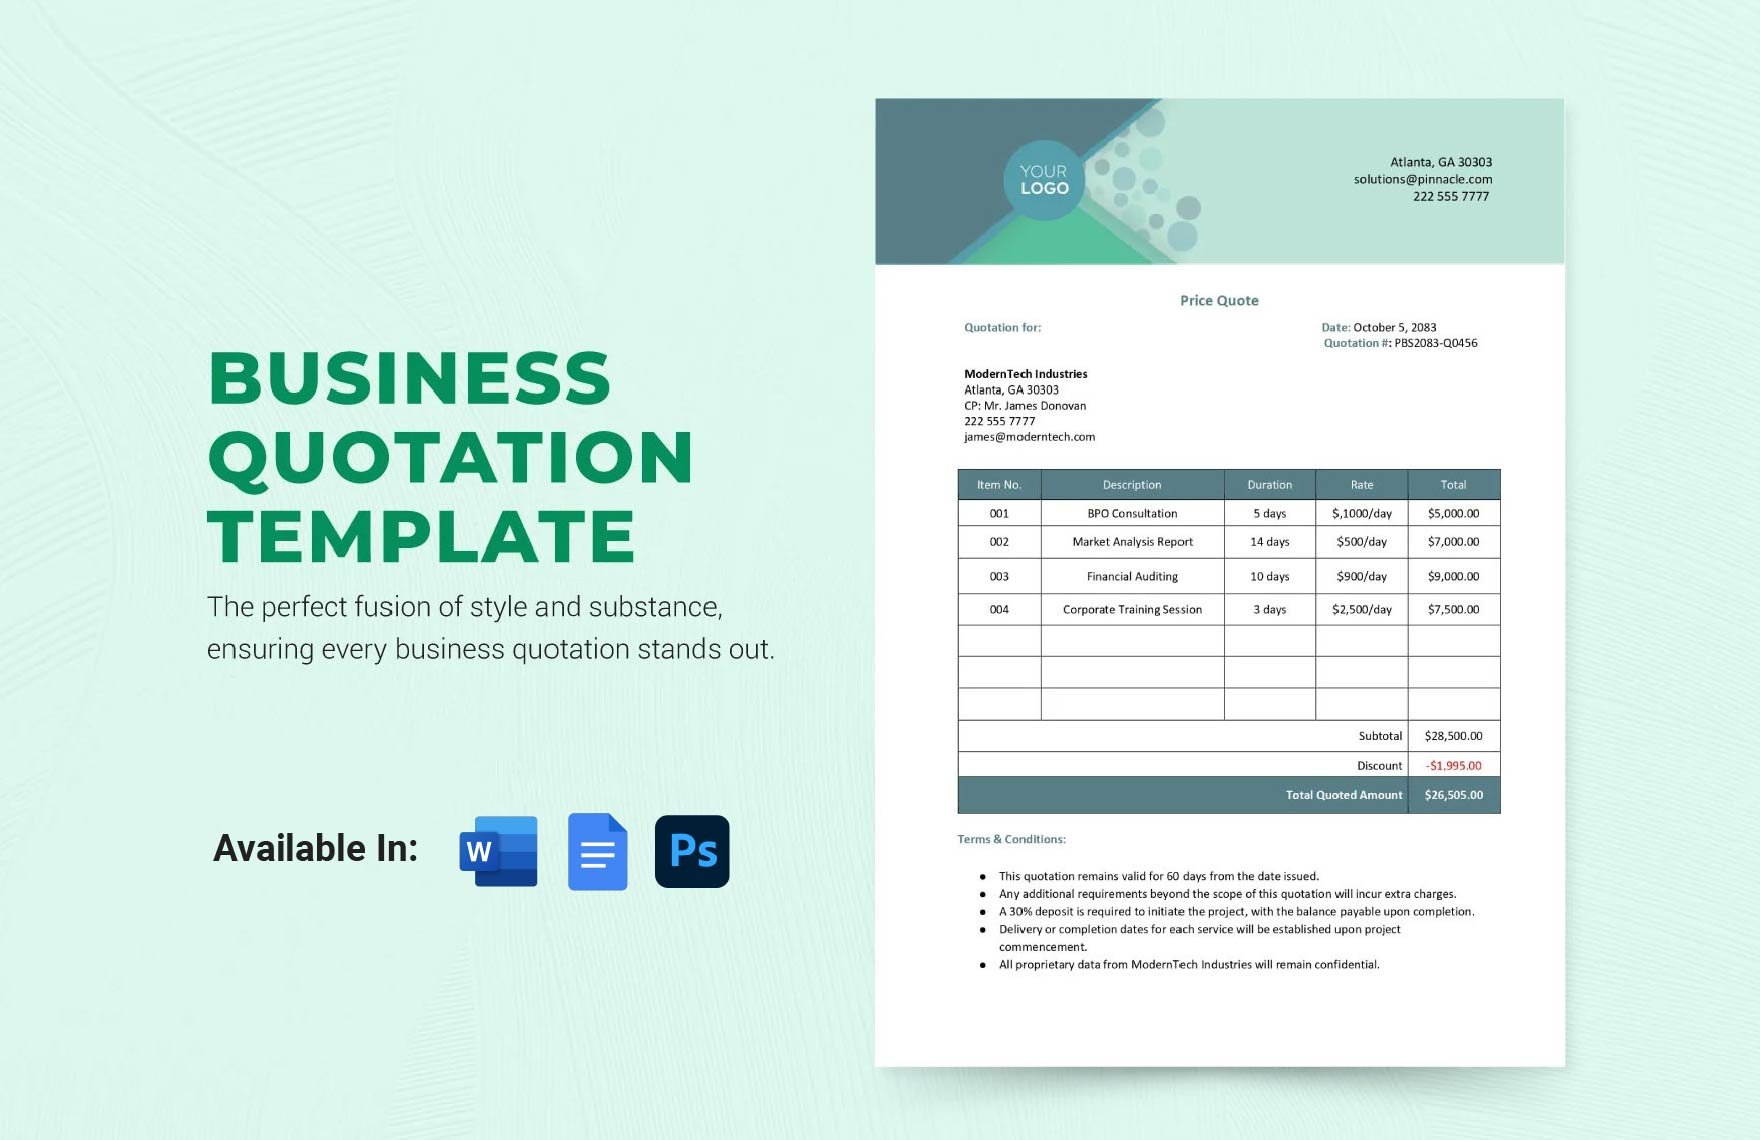 Business Quotation Template